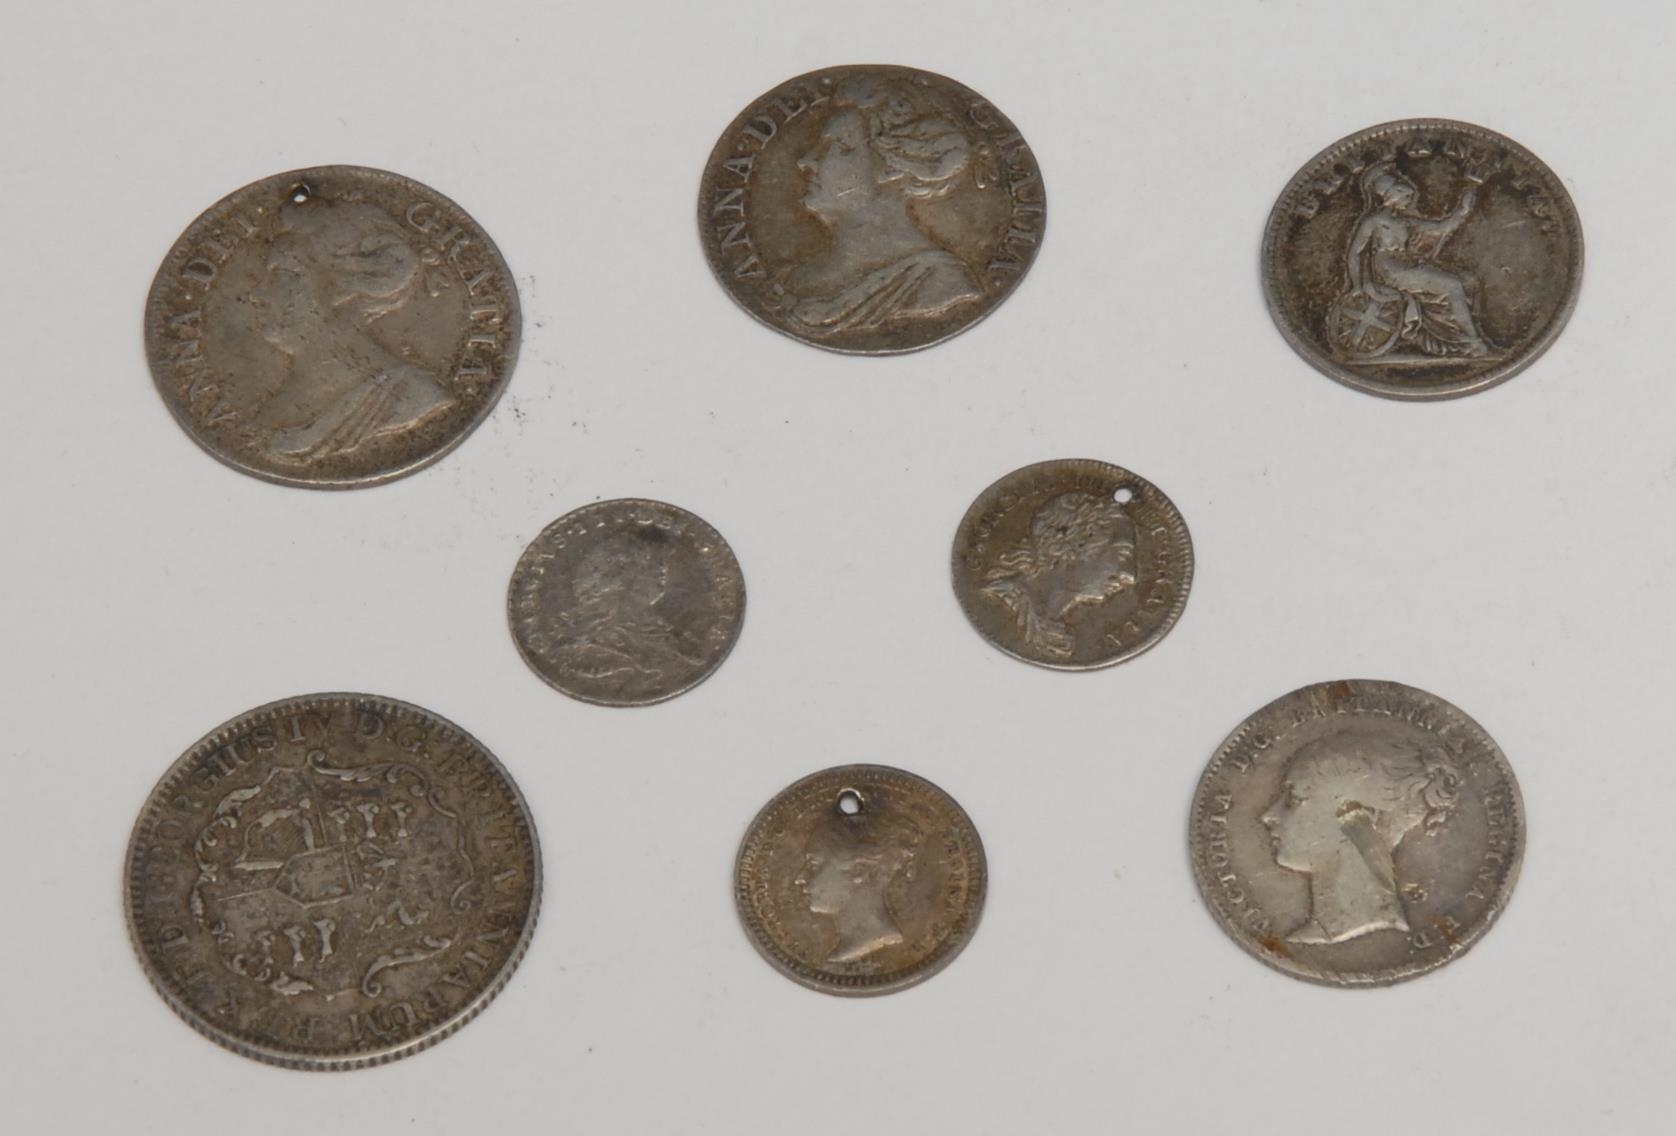 Coins - English small silver including some Maundy issues: Groats 1710 and 1854 (non-Maundy - Image 2 of 2